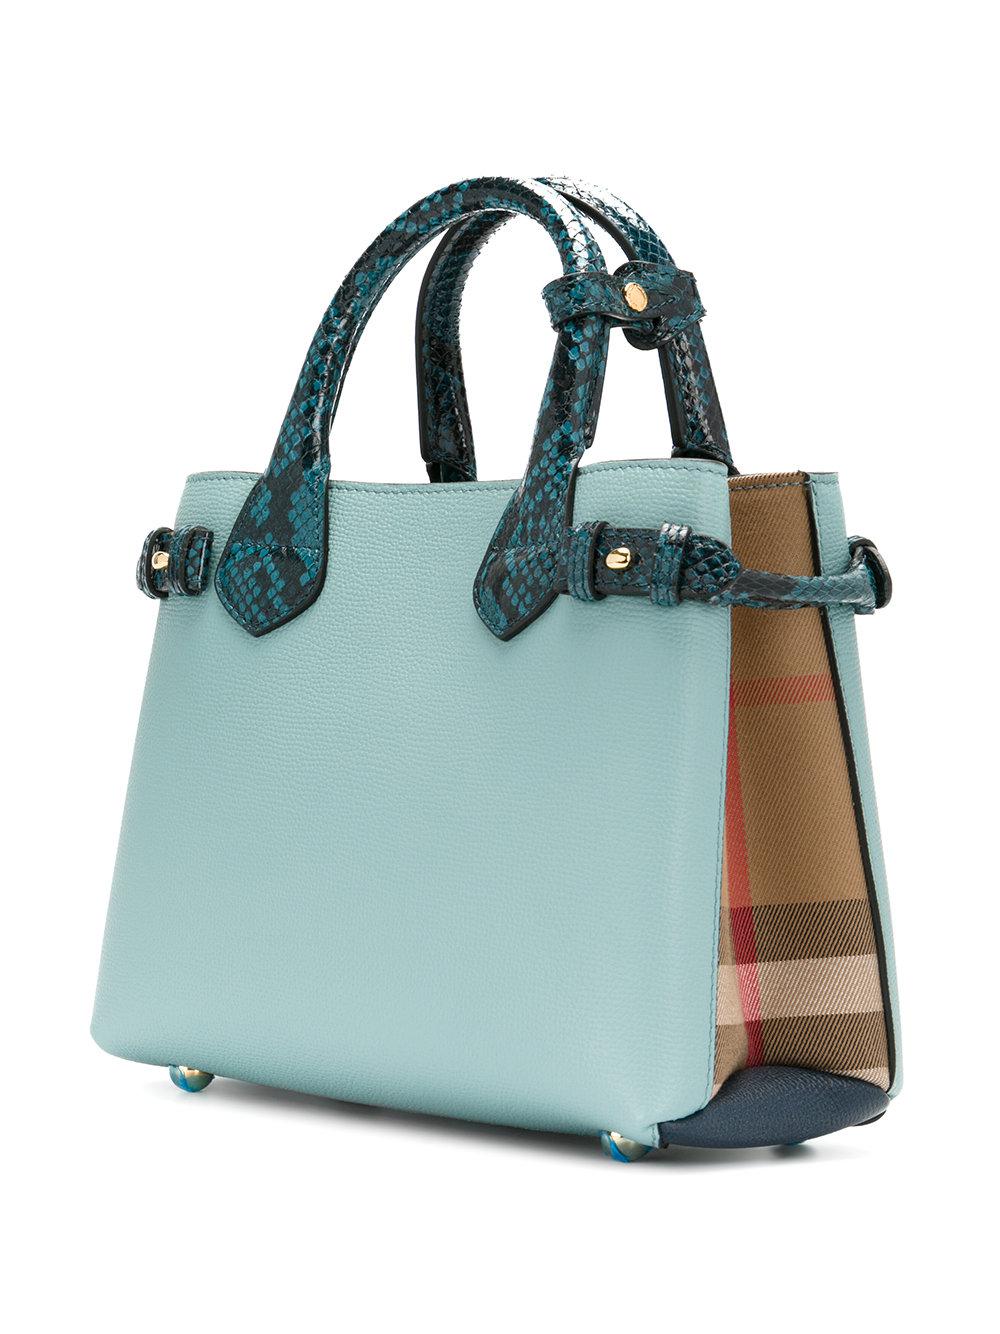 Burberry Leather Studded Fish Tote in Blue - Lyst